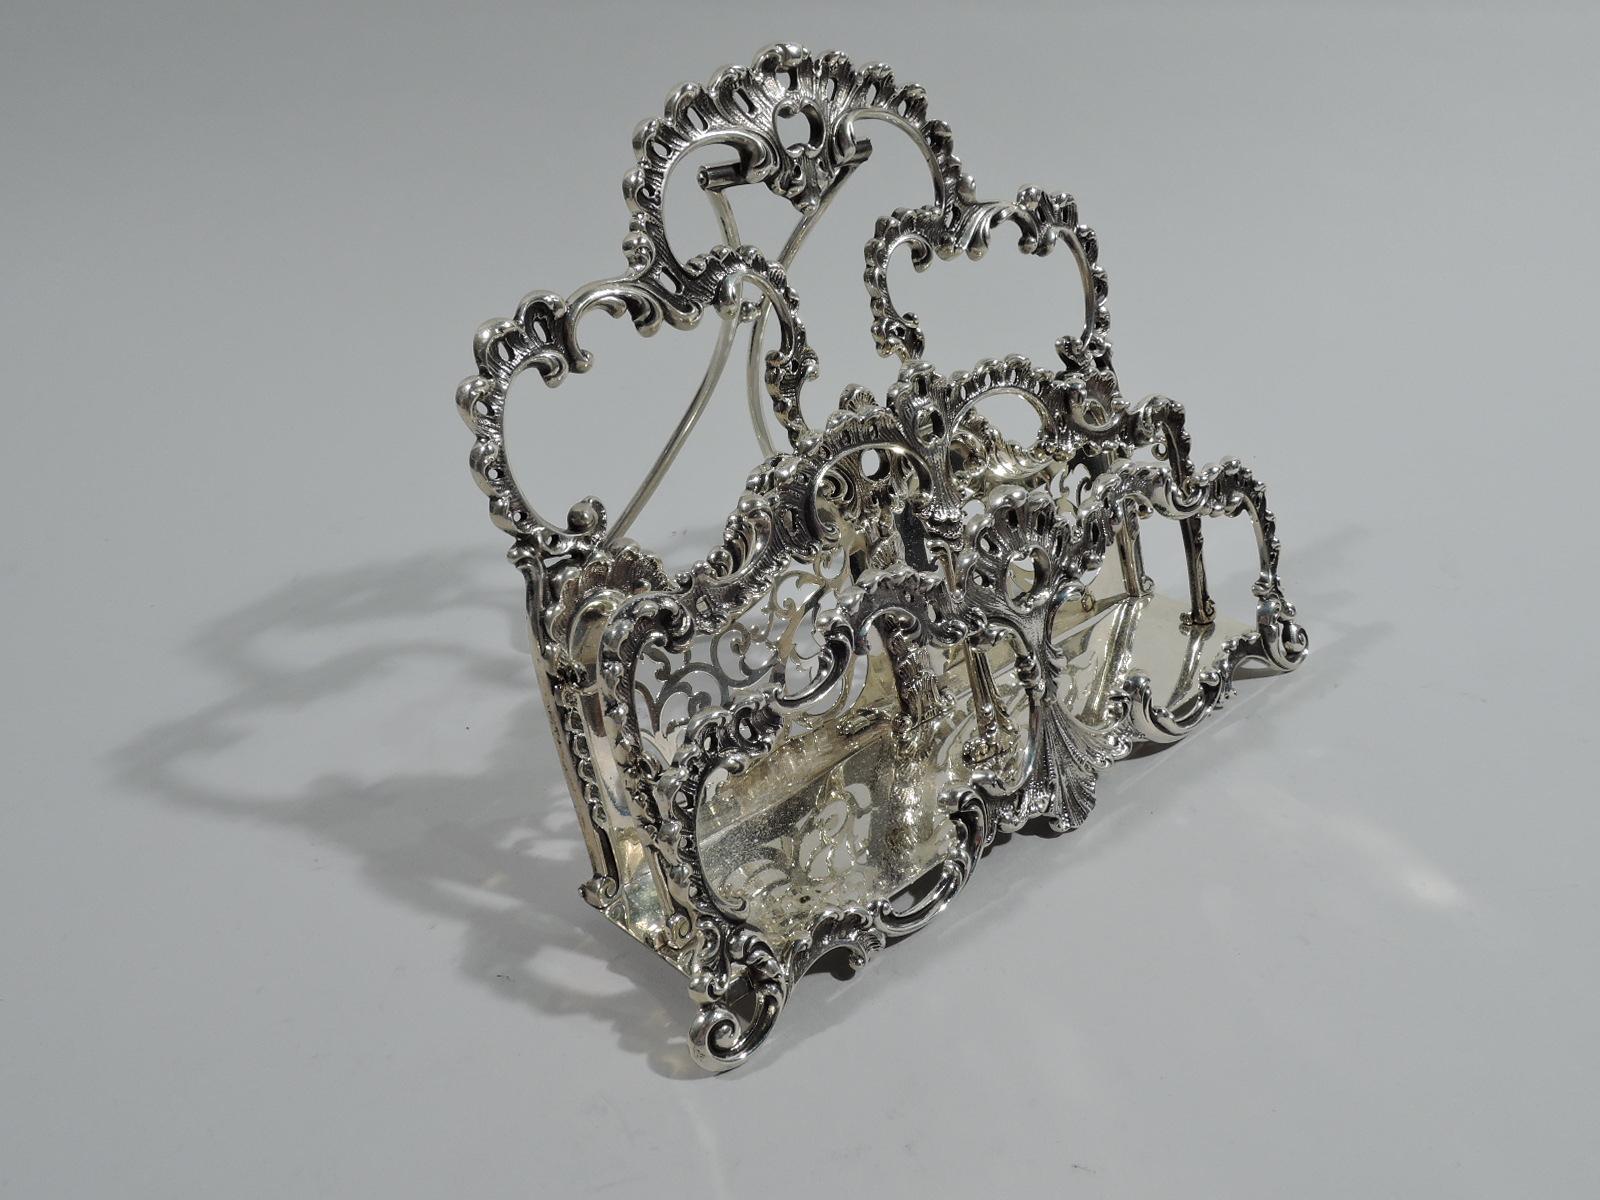 Victorian Rococo sterling silver letter rack. Made by Howard & Co. in New York, ca 1890. Three open partitions in form of pierced and leafing scrolled cartouches mounted to plain and solid rectangle. Back partition has open scrollwork set in in